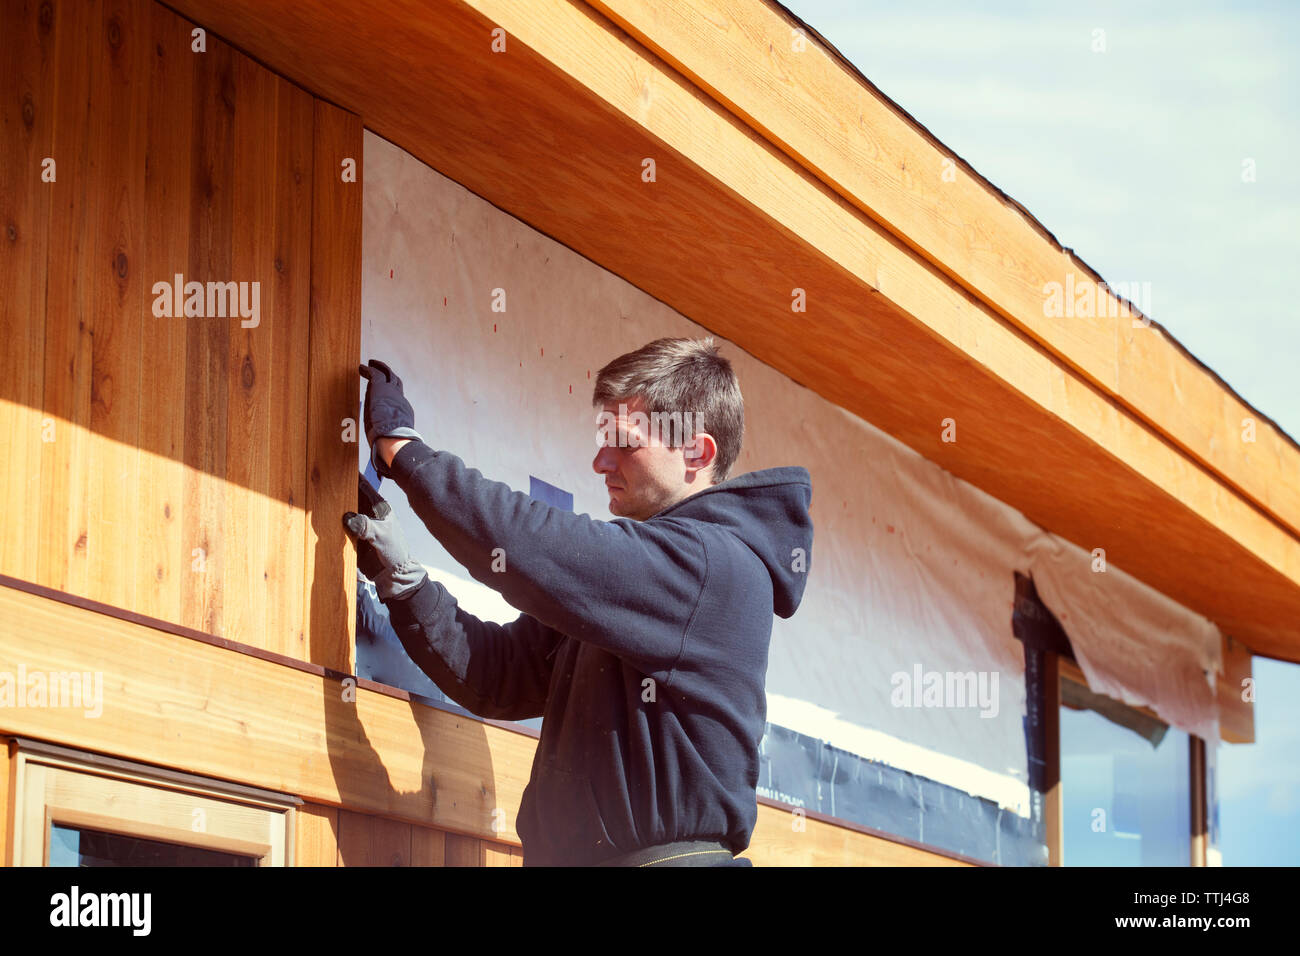 Worker constructing house during sunny day Stock Photo